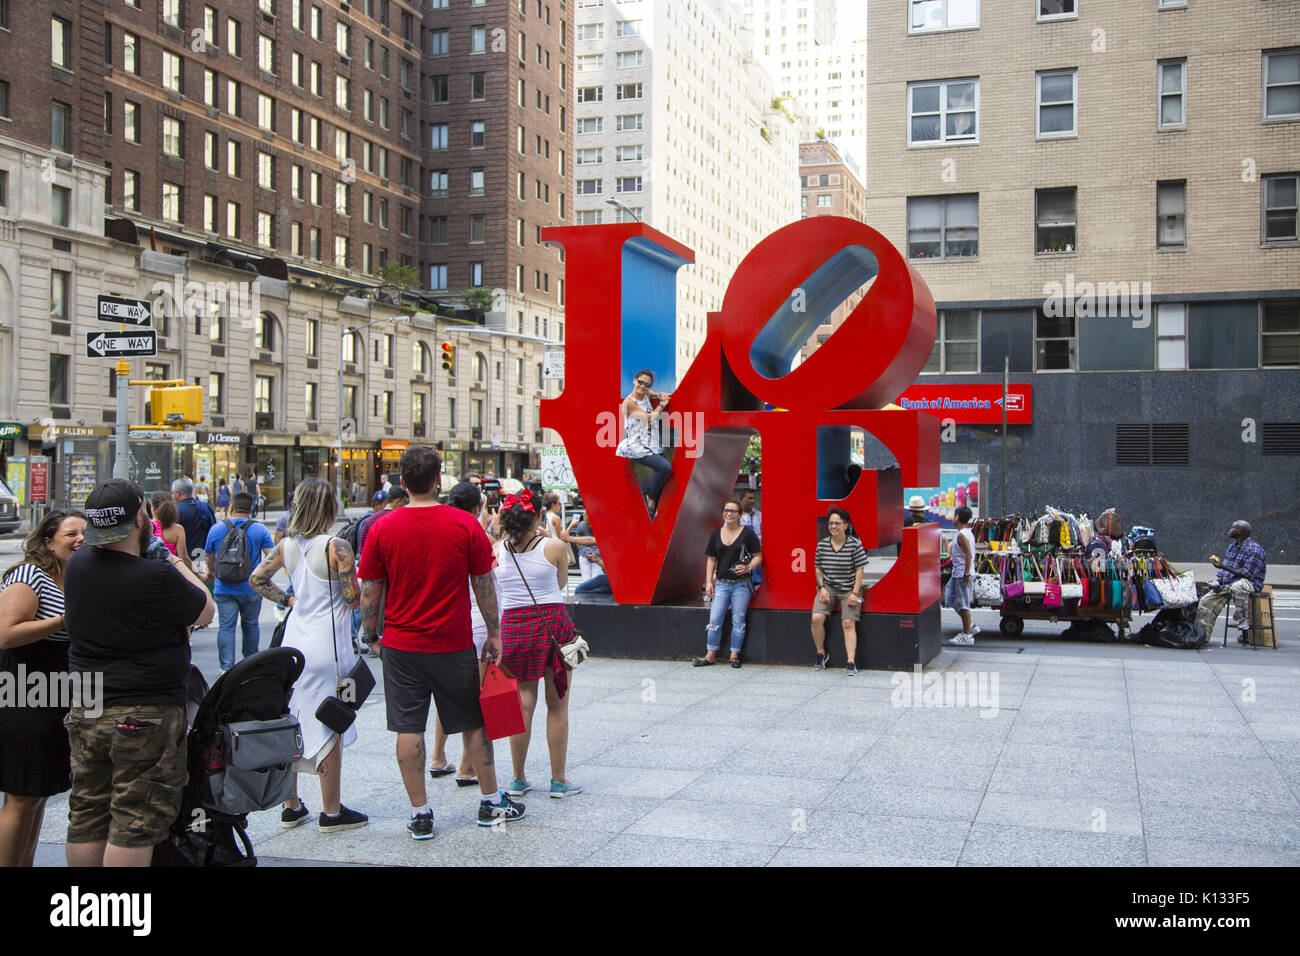 People constantly line up to have their photos taken in front of Robert Indiana's Love Sculpture, a pop art piece, on Sixth Avenue in mid-town Manhattan, which may be the second most popular sculpture in the city (after the Statue of Liberty). Stock Photo